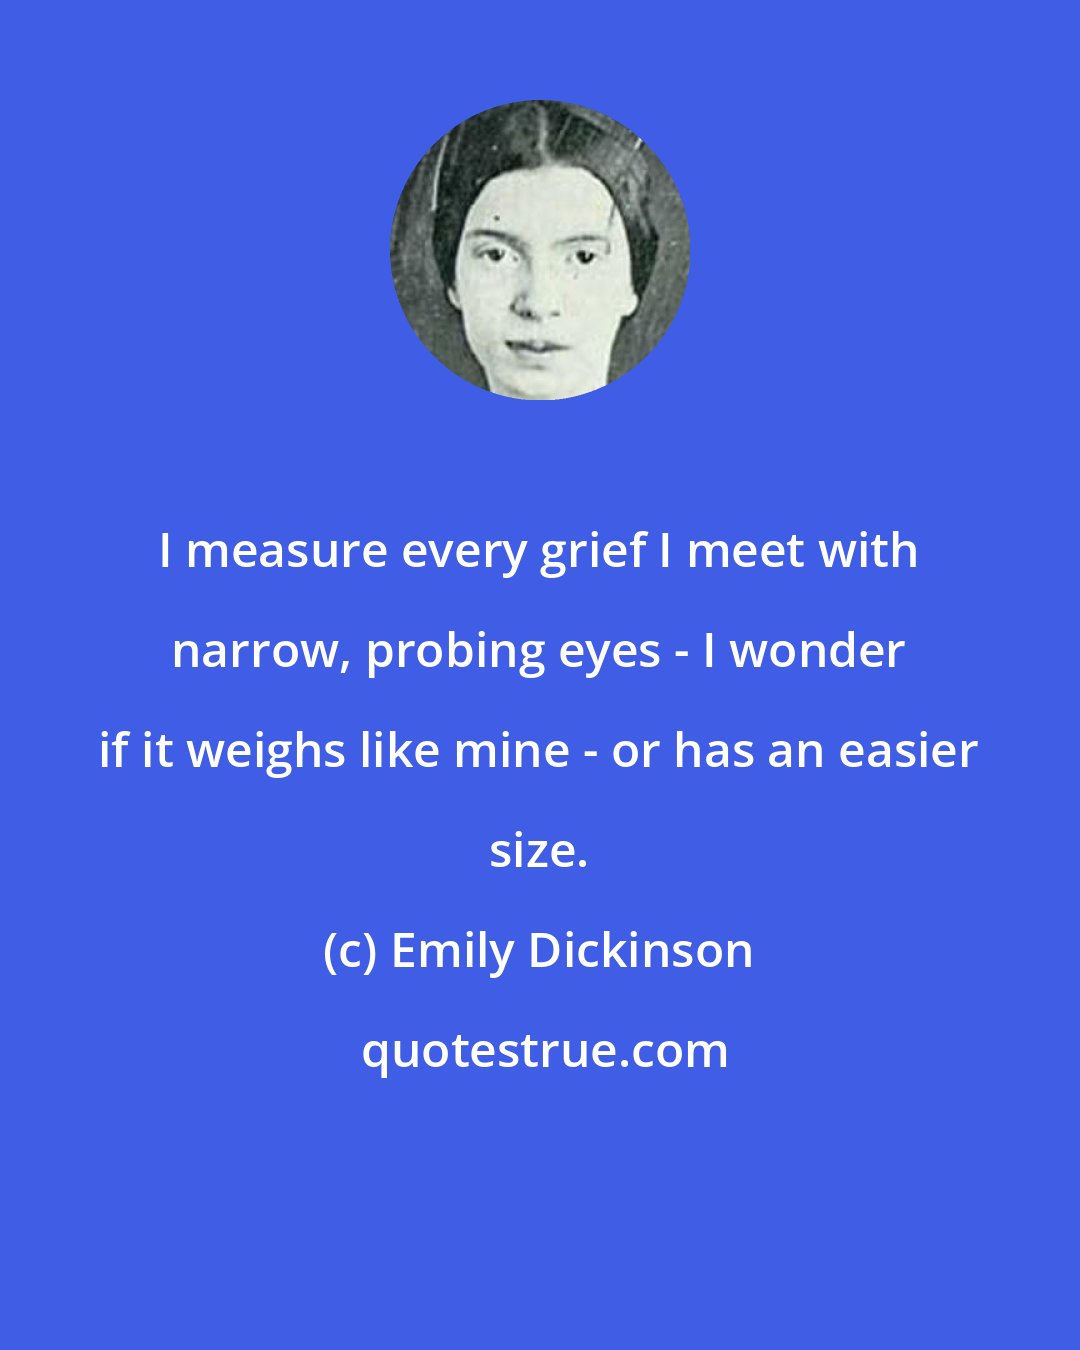 Emily Dickinson: I measure every grief I meet with narrow, probing eyes - I wonder if it weighs like mine - or has an easier size.